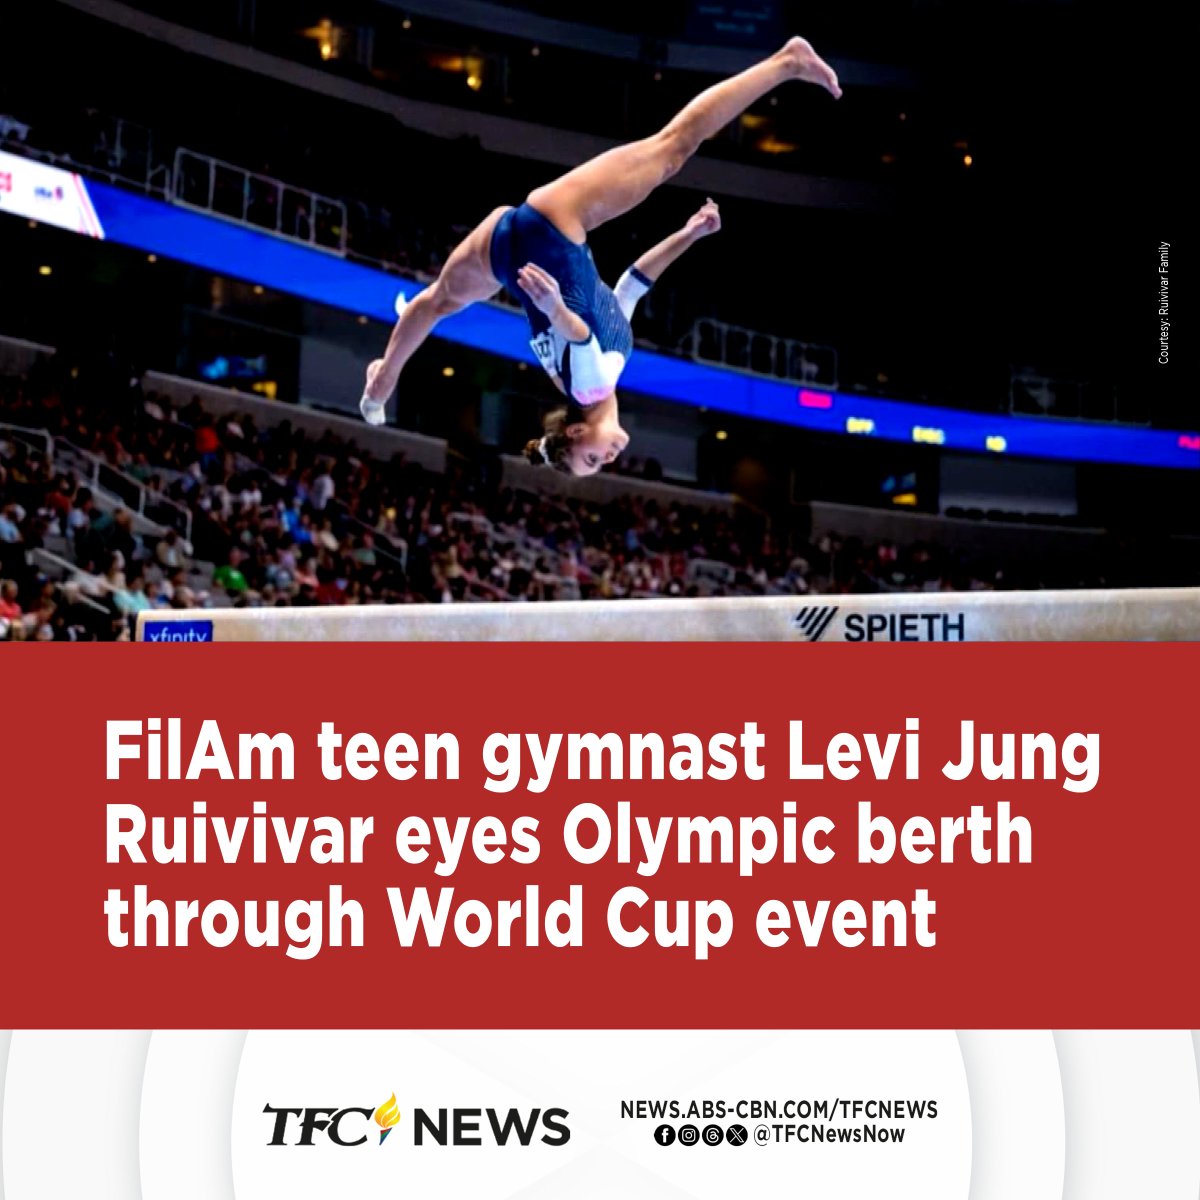 FilAm teen gymnast Levi Jung Ruivivar is hopeful of qualifying for the Paris Olympics through a World Cup event in Qatar next week. @StevieAngeles reports. #TFCNews WATCH: youtu.be/oOughdK7gJs